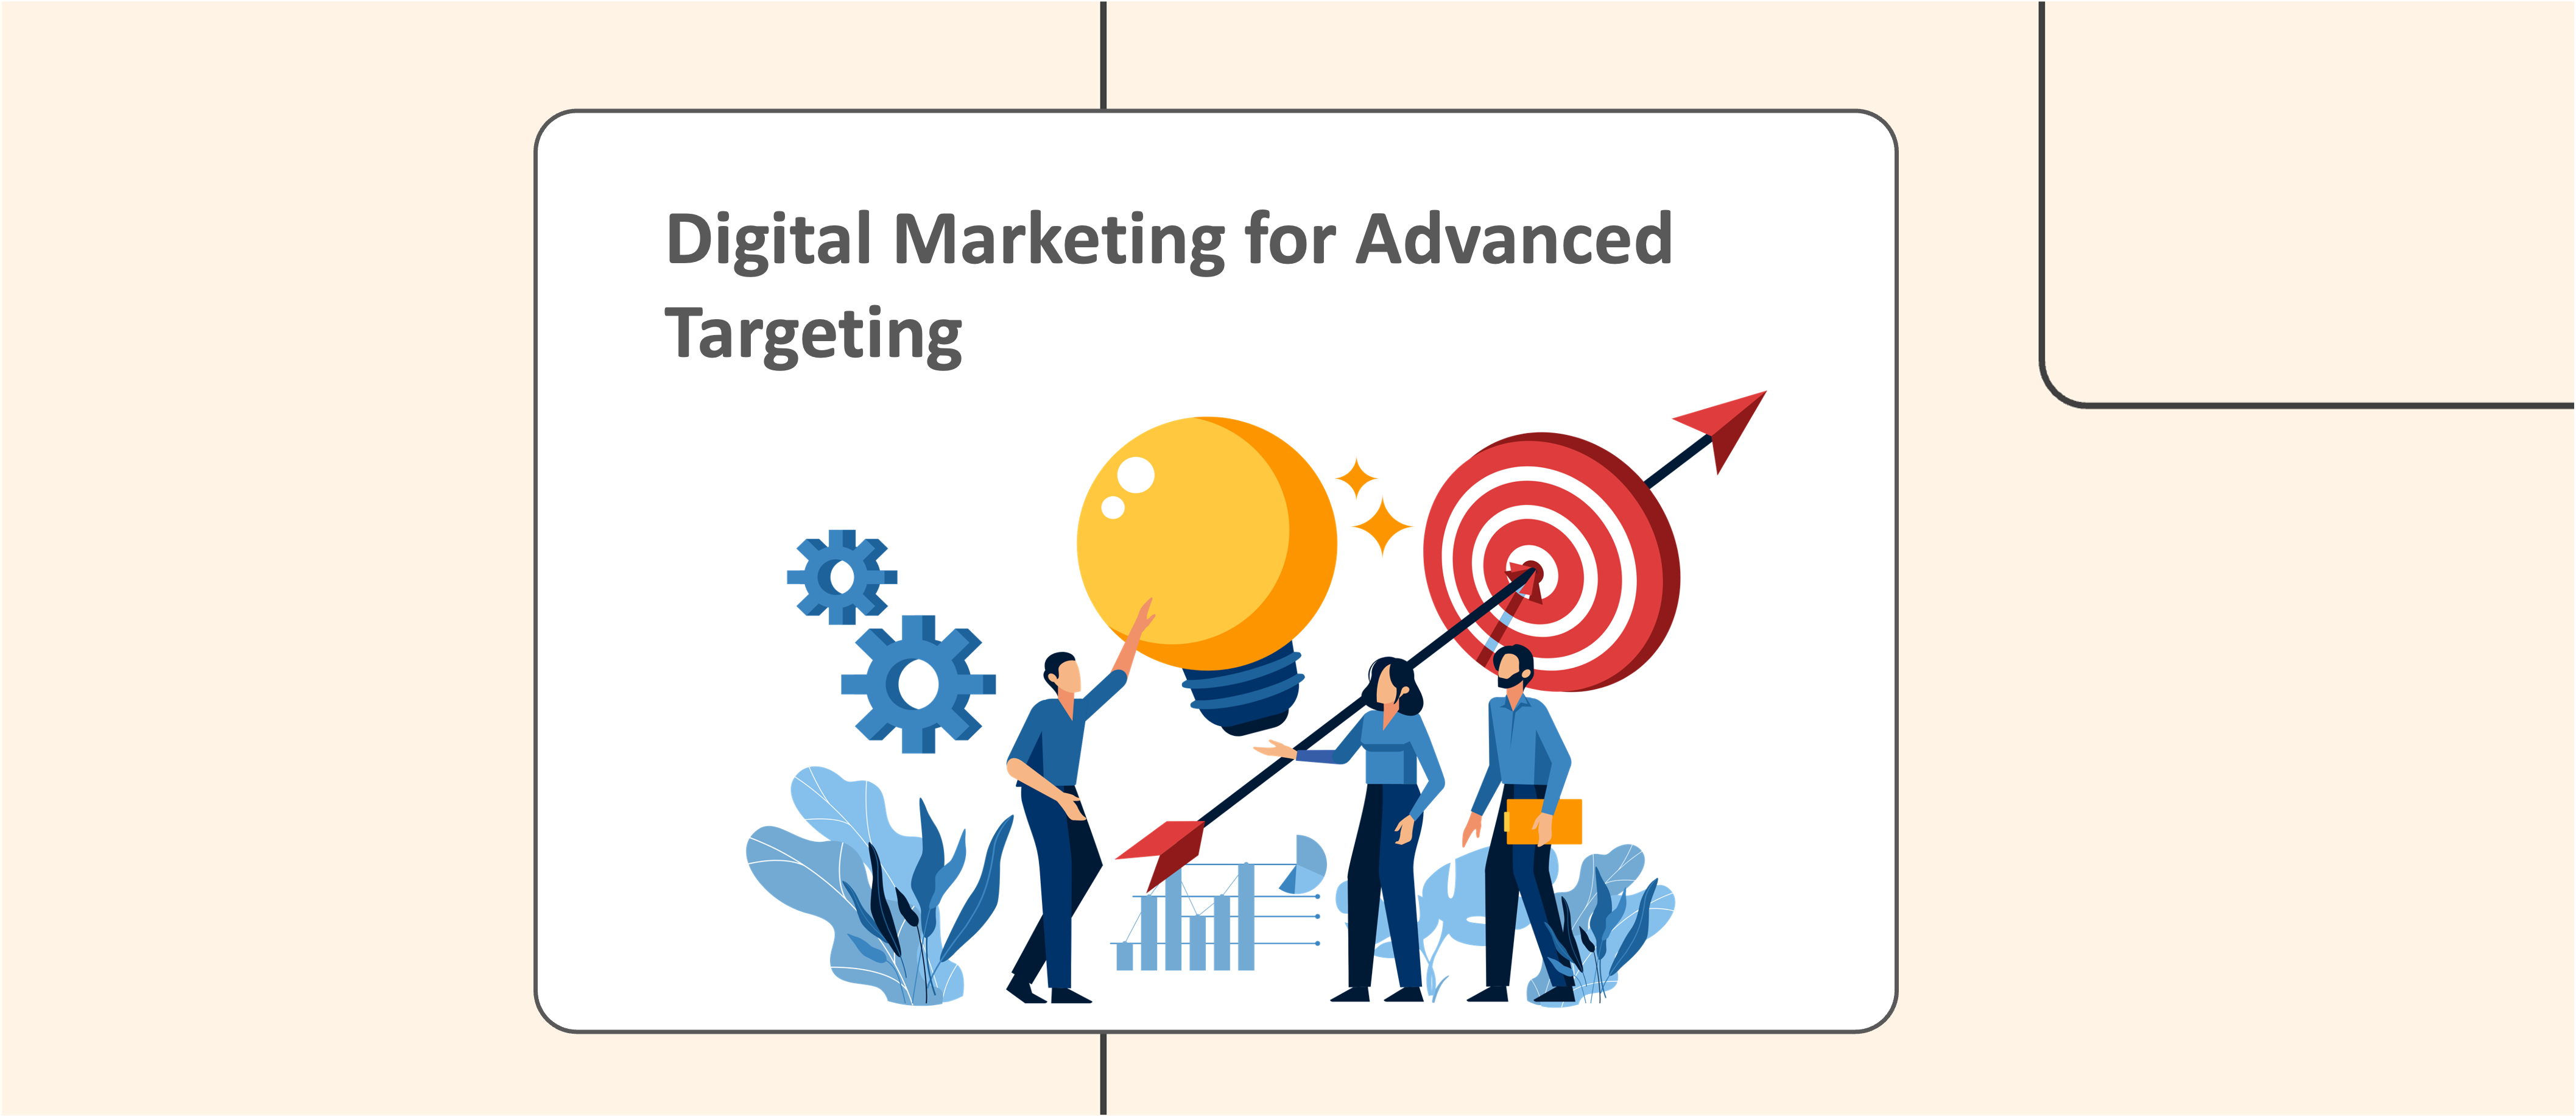 Understanding the Potential of Digital Marketing for Advanced Targeting